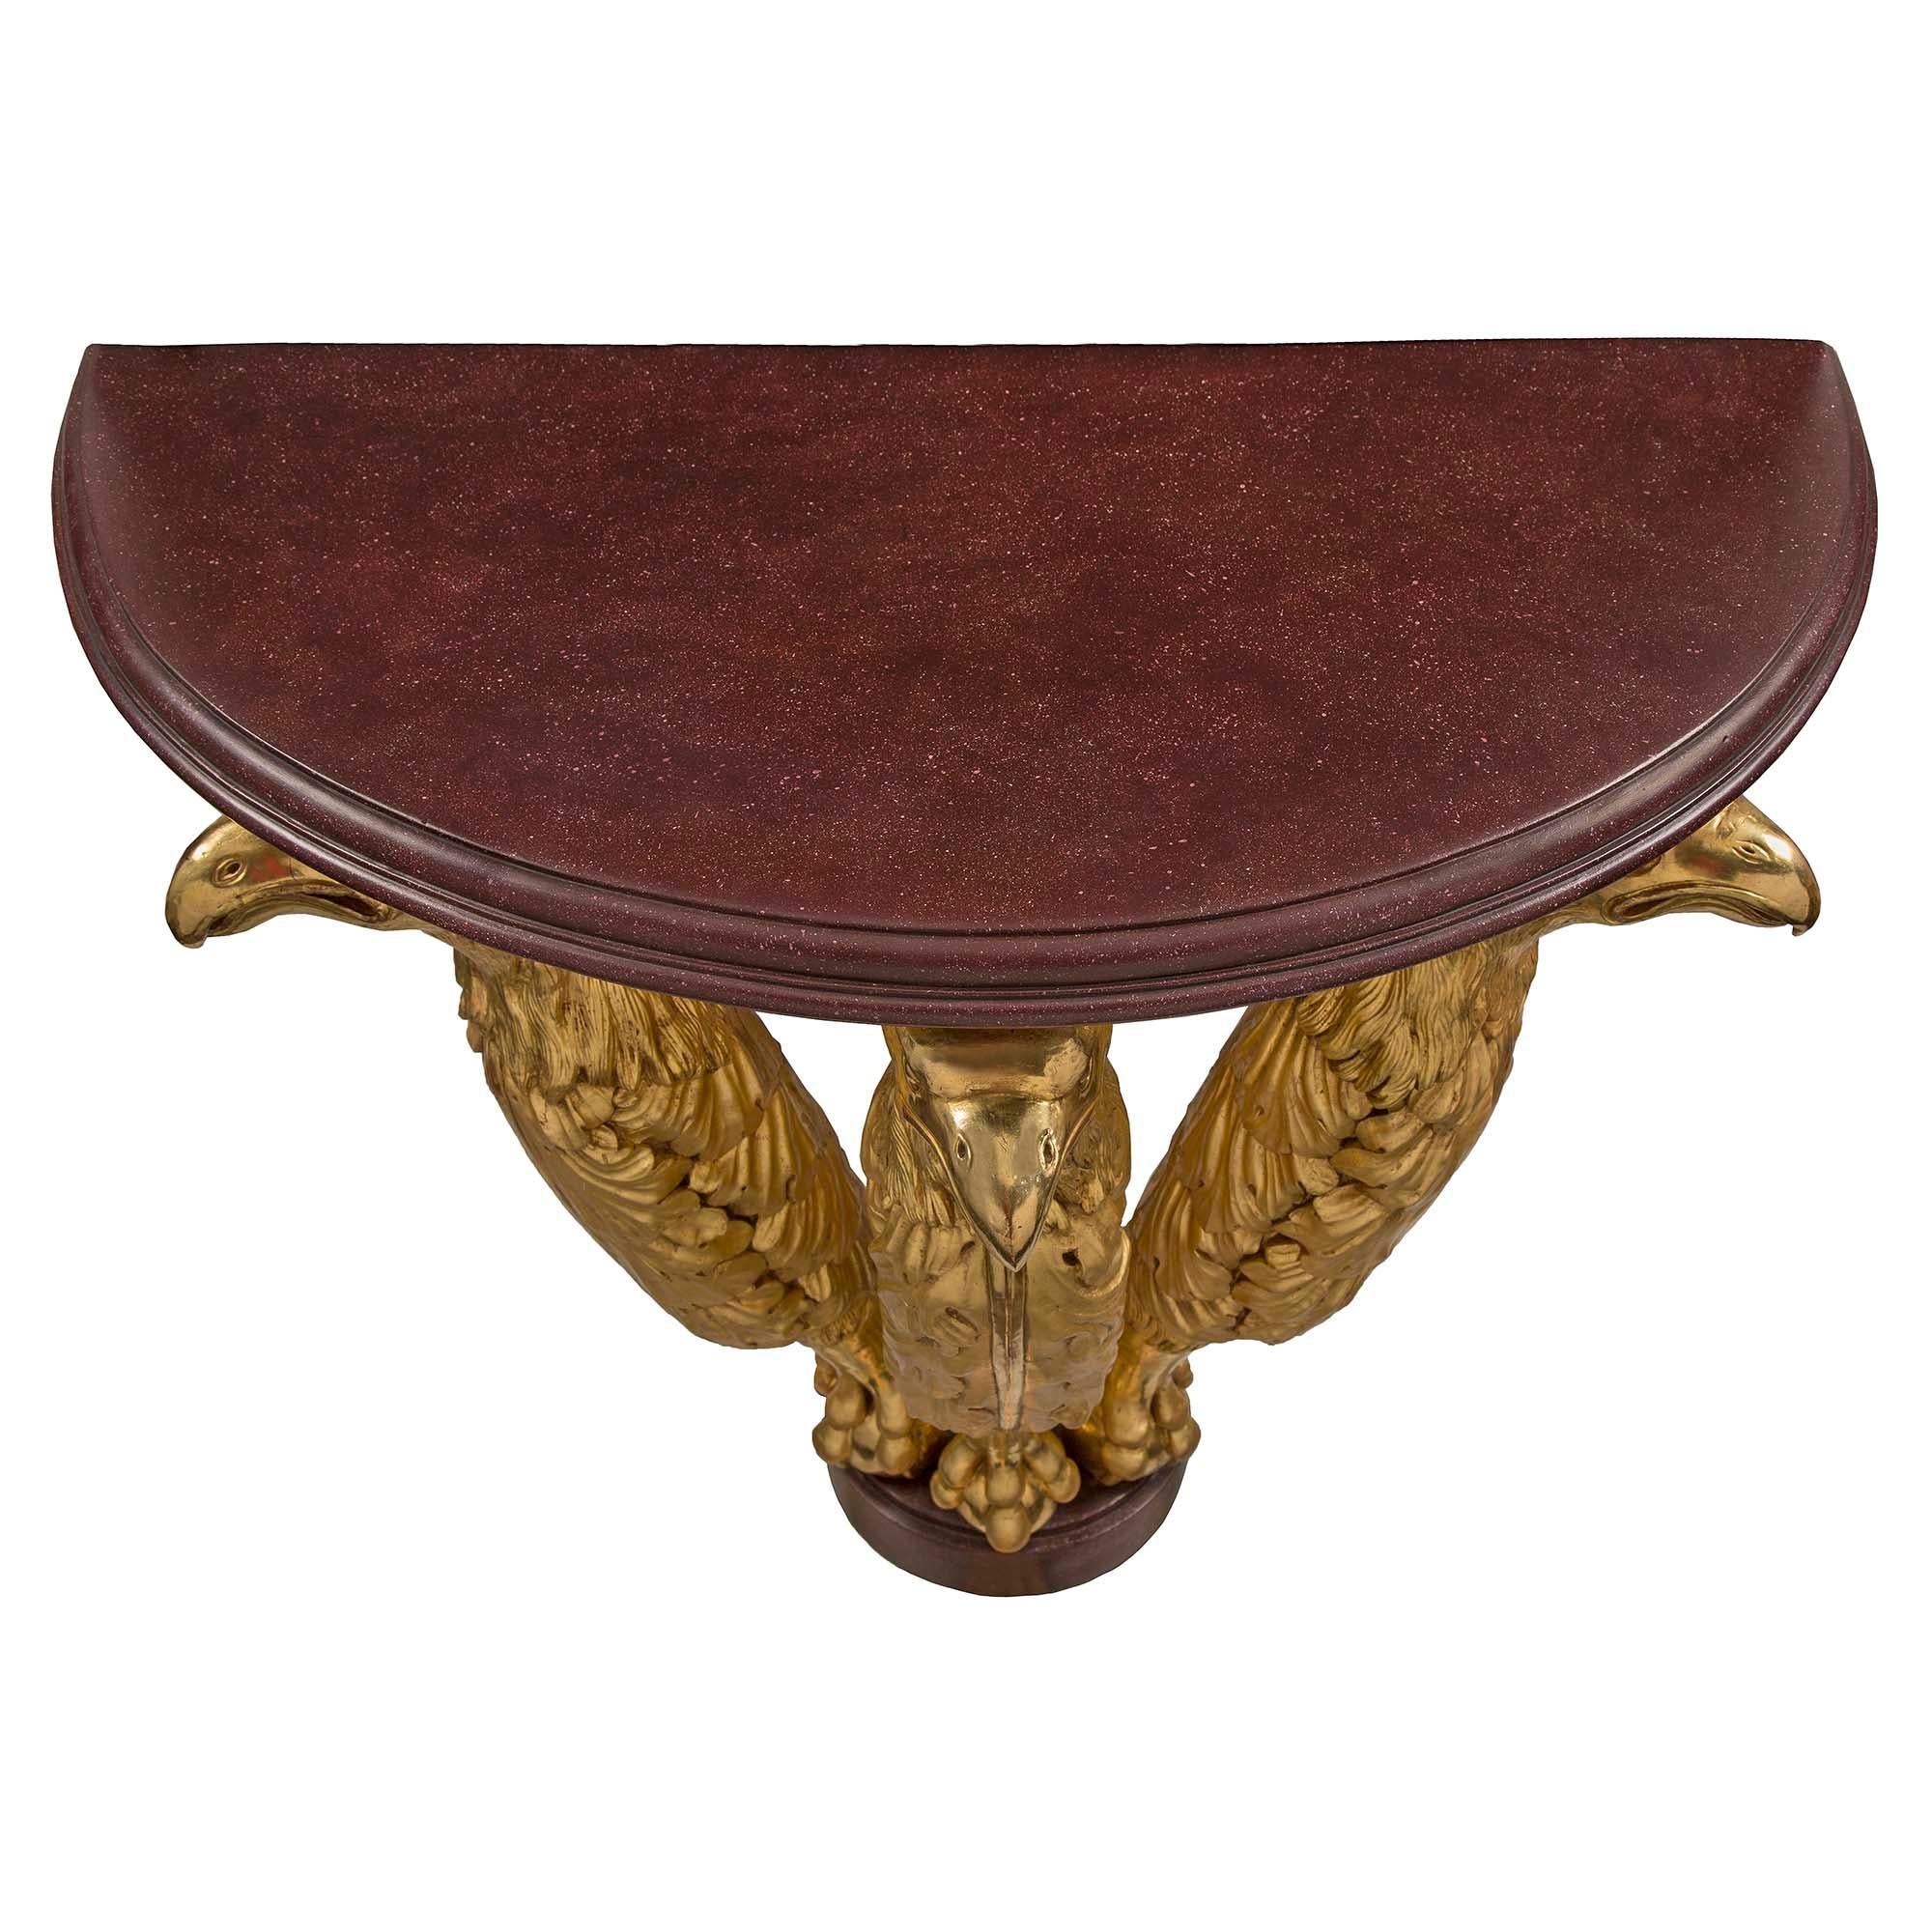 A rare and very unique Austrian early 19th century Neo-Classical st. giltwood and faux Porphyry demi lune console. This wall mounted statement making console is raised by a beautiful faux Porphyry mottled base. The central supports are three